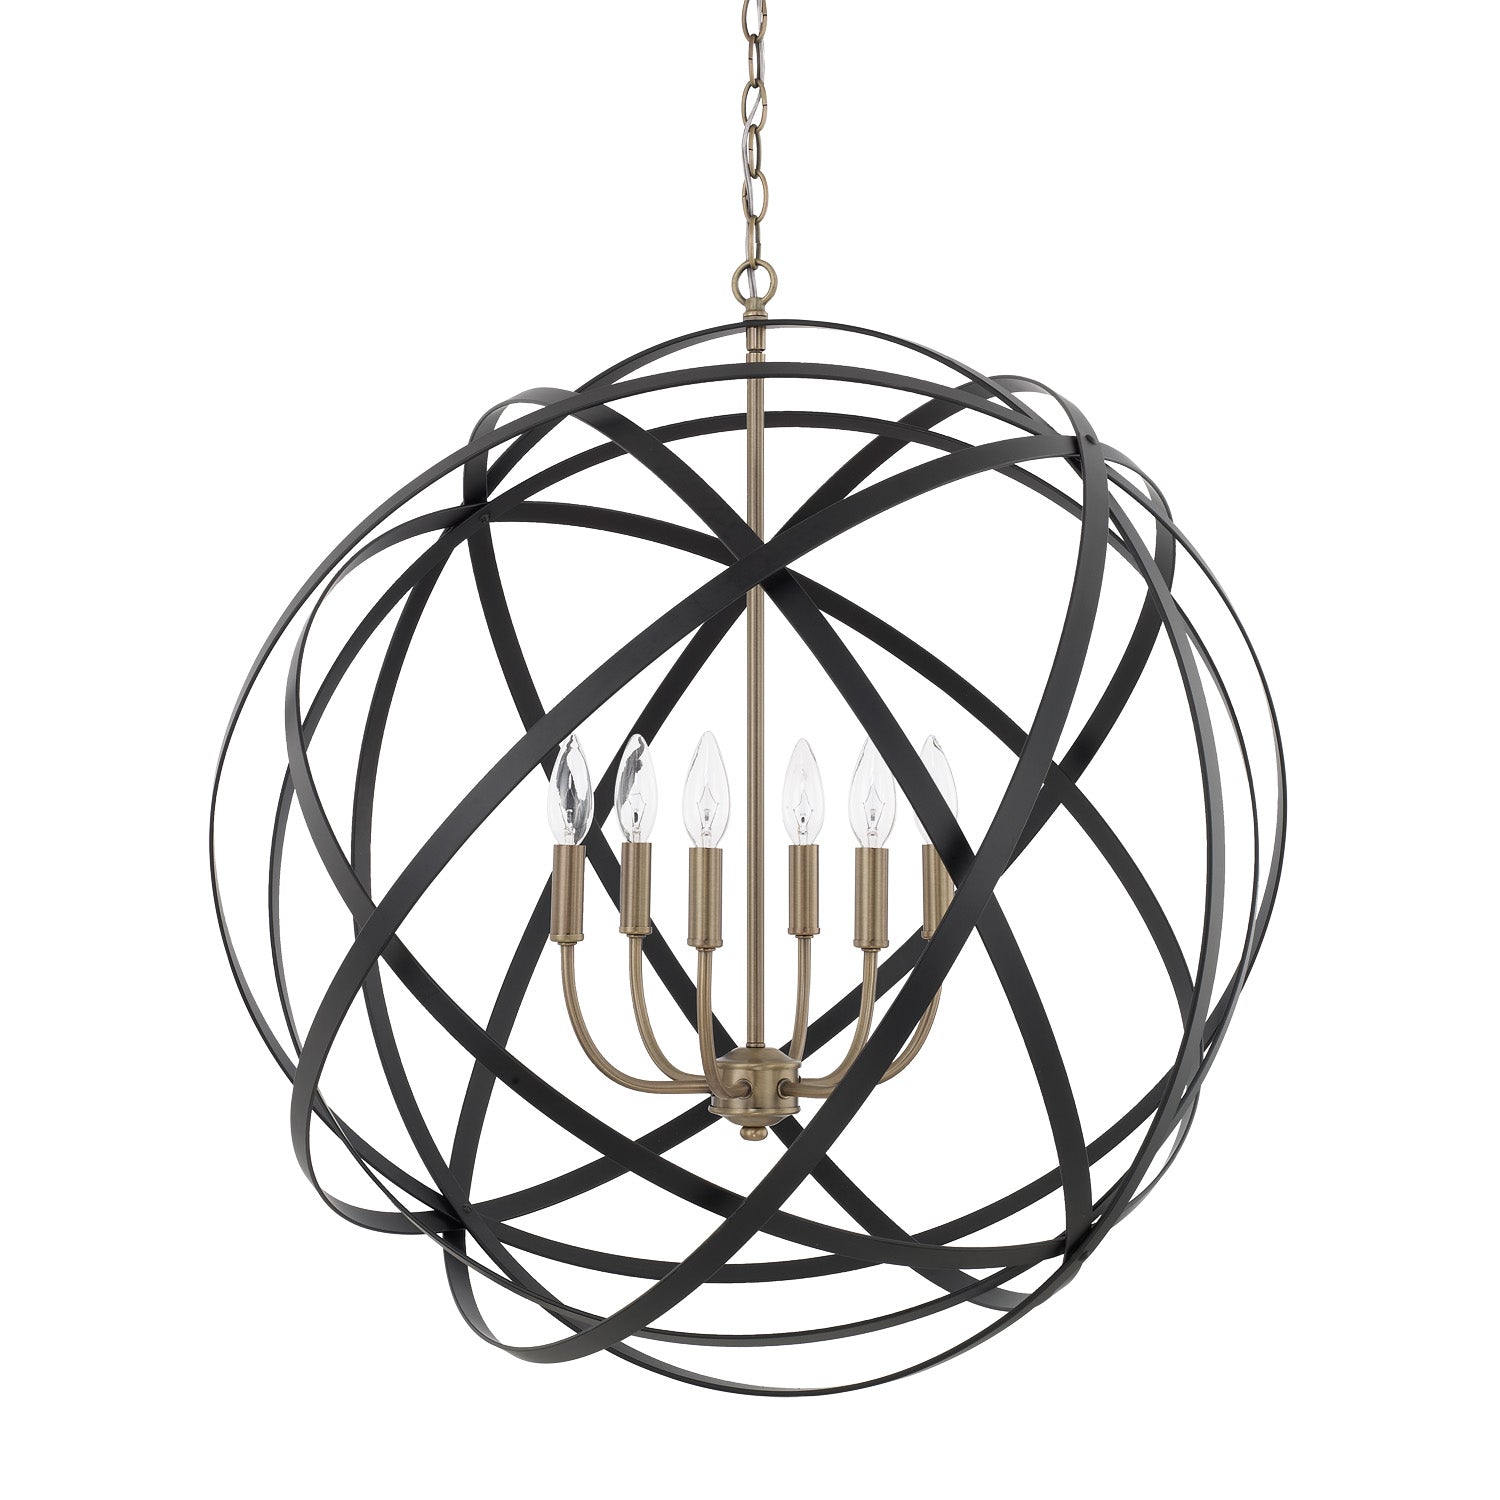 Capital Axis 4236AB Pendant Light - Aged Brass and Black